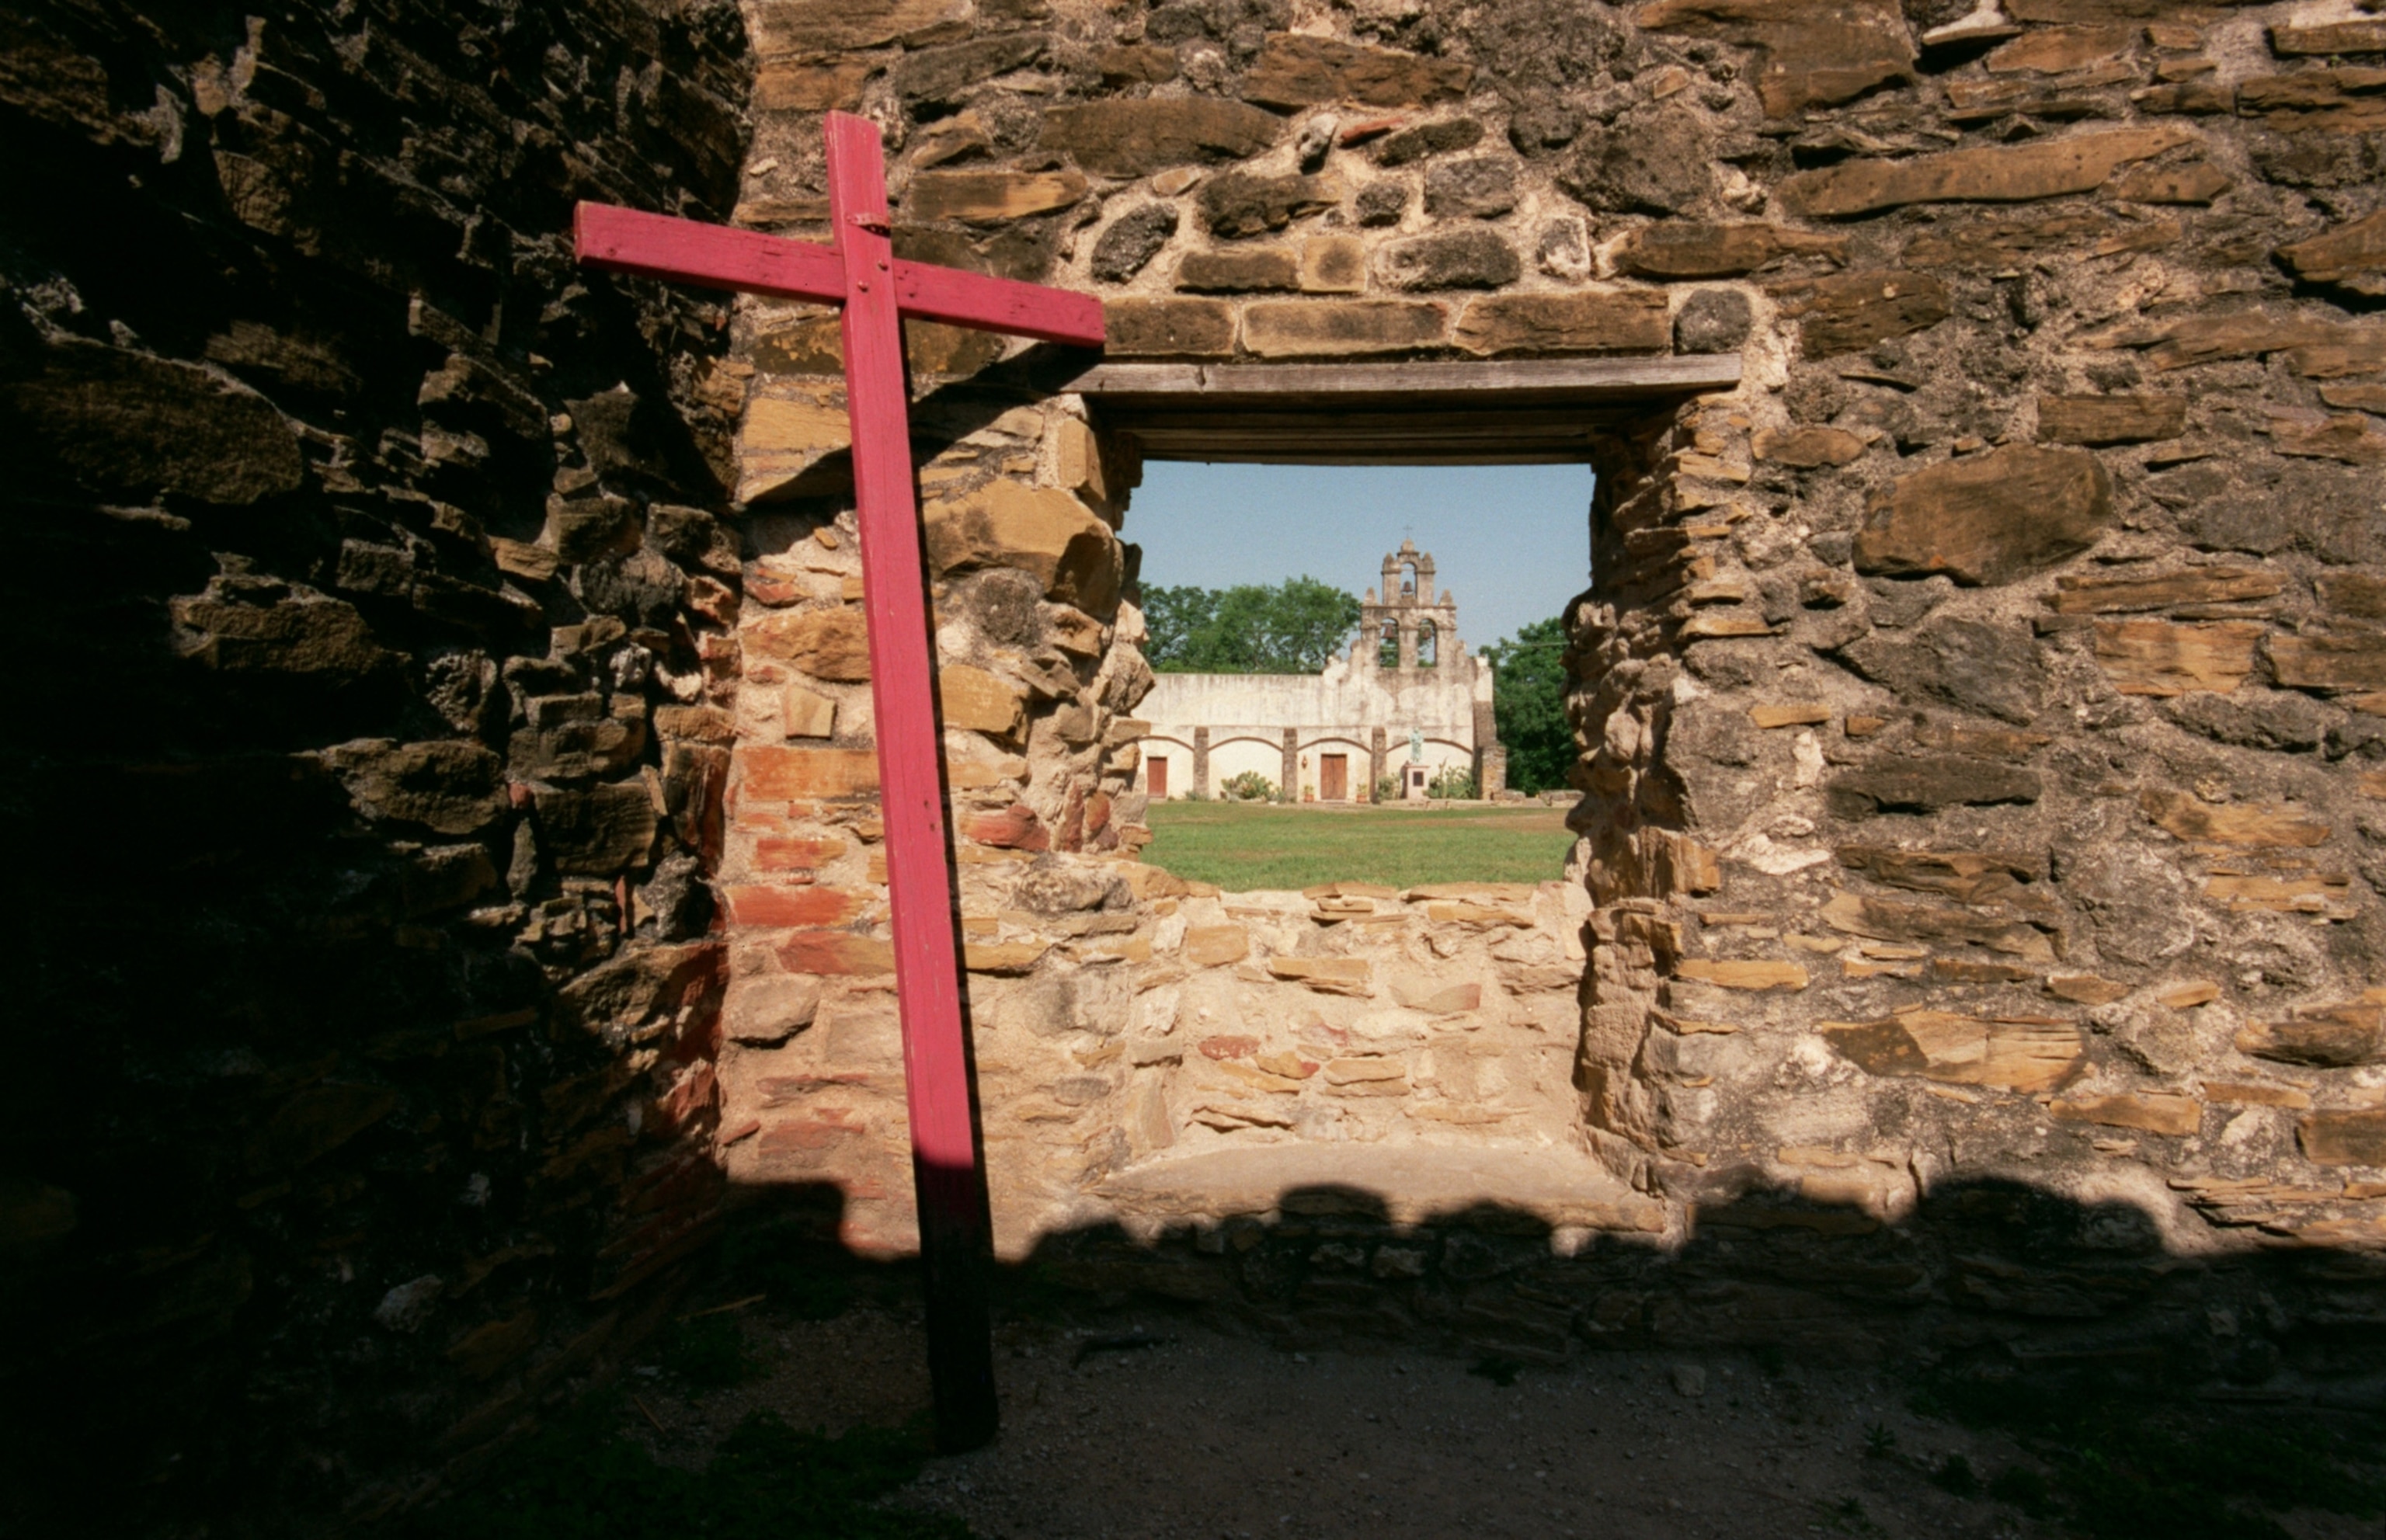 The rising church at Mission San Juan in San Antonio is seen through the window of one of the crumbling ruins across its wide plaza.